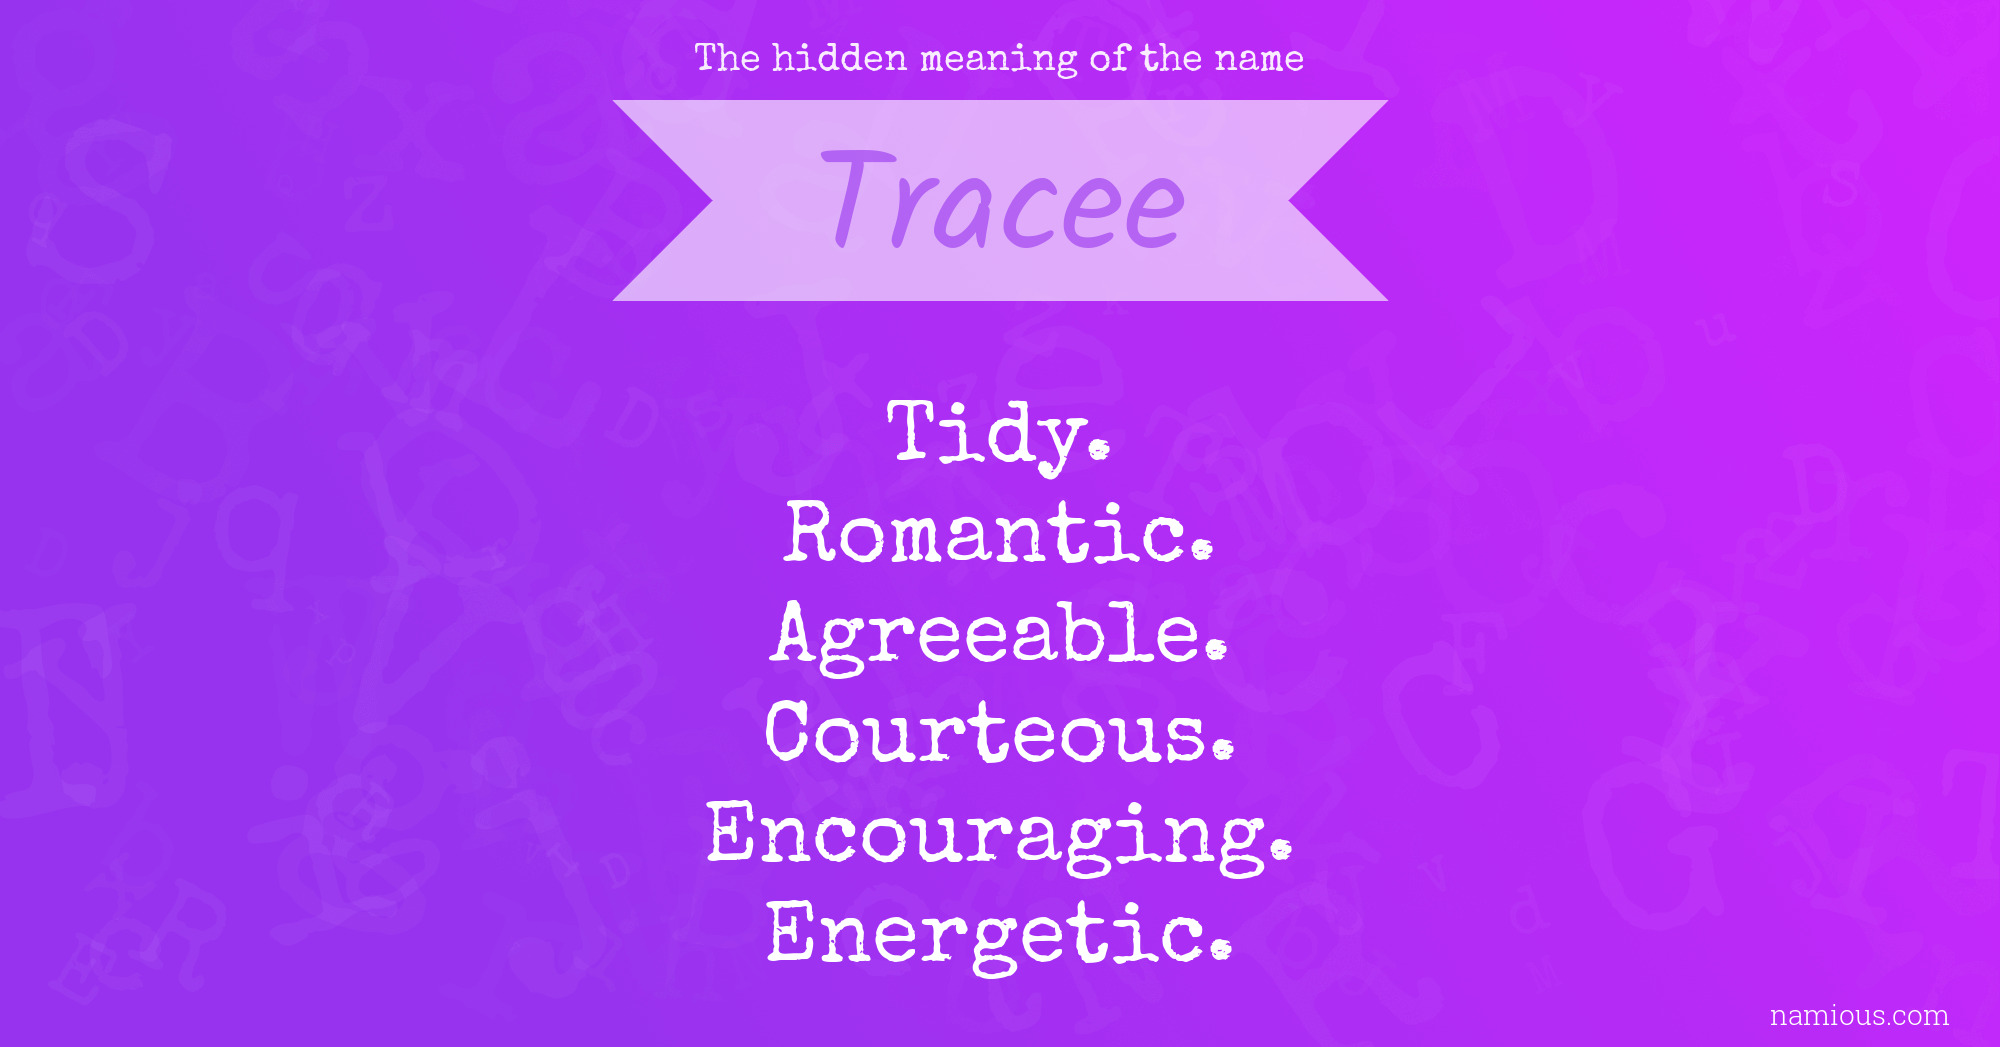 The hidden meaning of the name Tracee